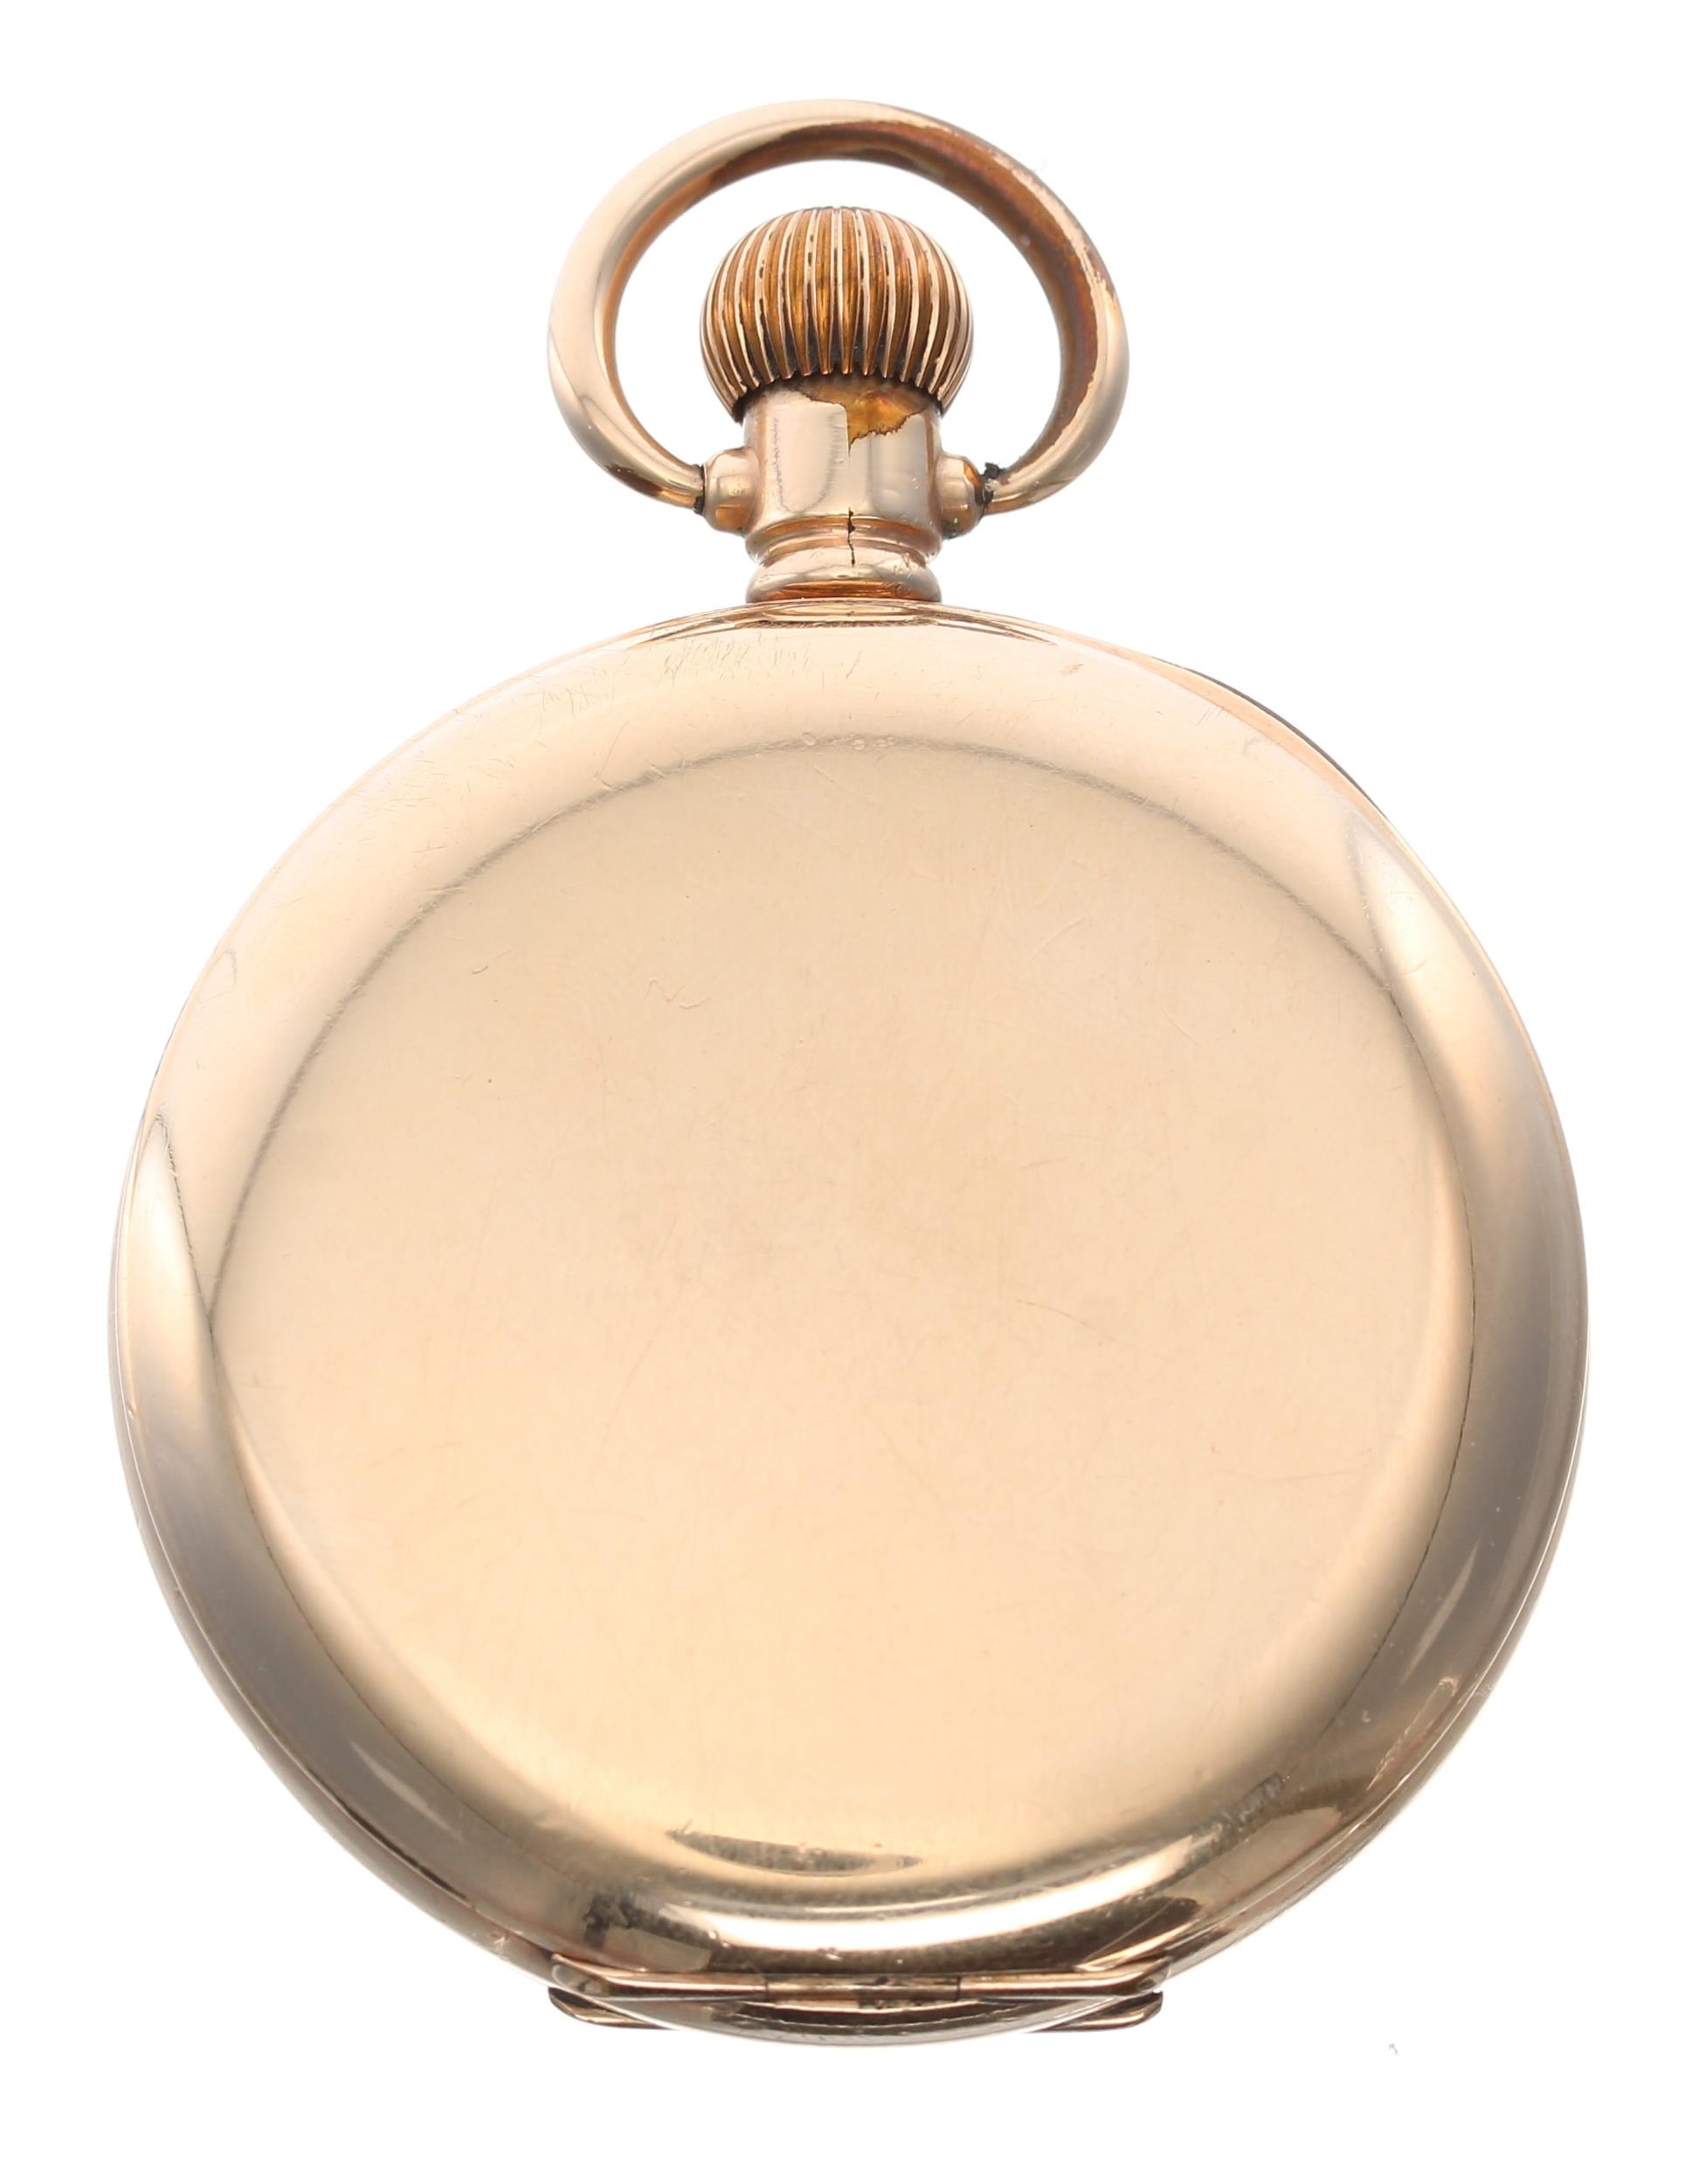 American Waltham gold plated lever pocket watch, circa 1918, signed 17 jewel movement, no. 21373915, - Image 4 of 4